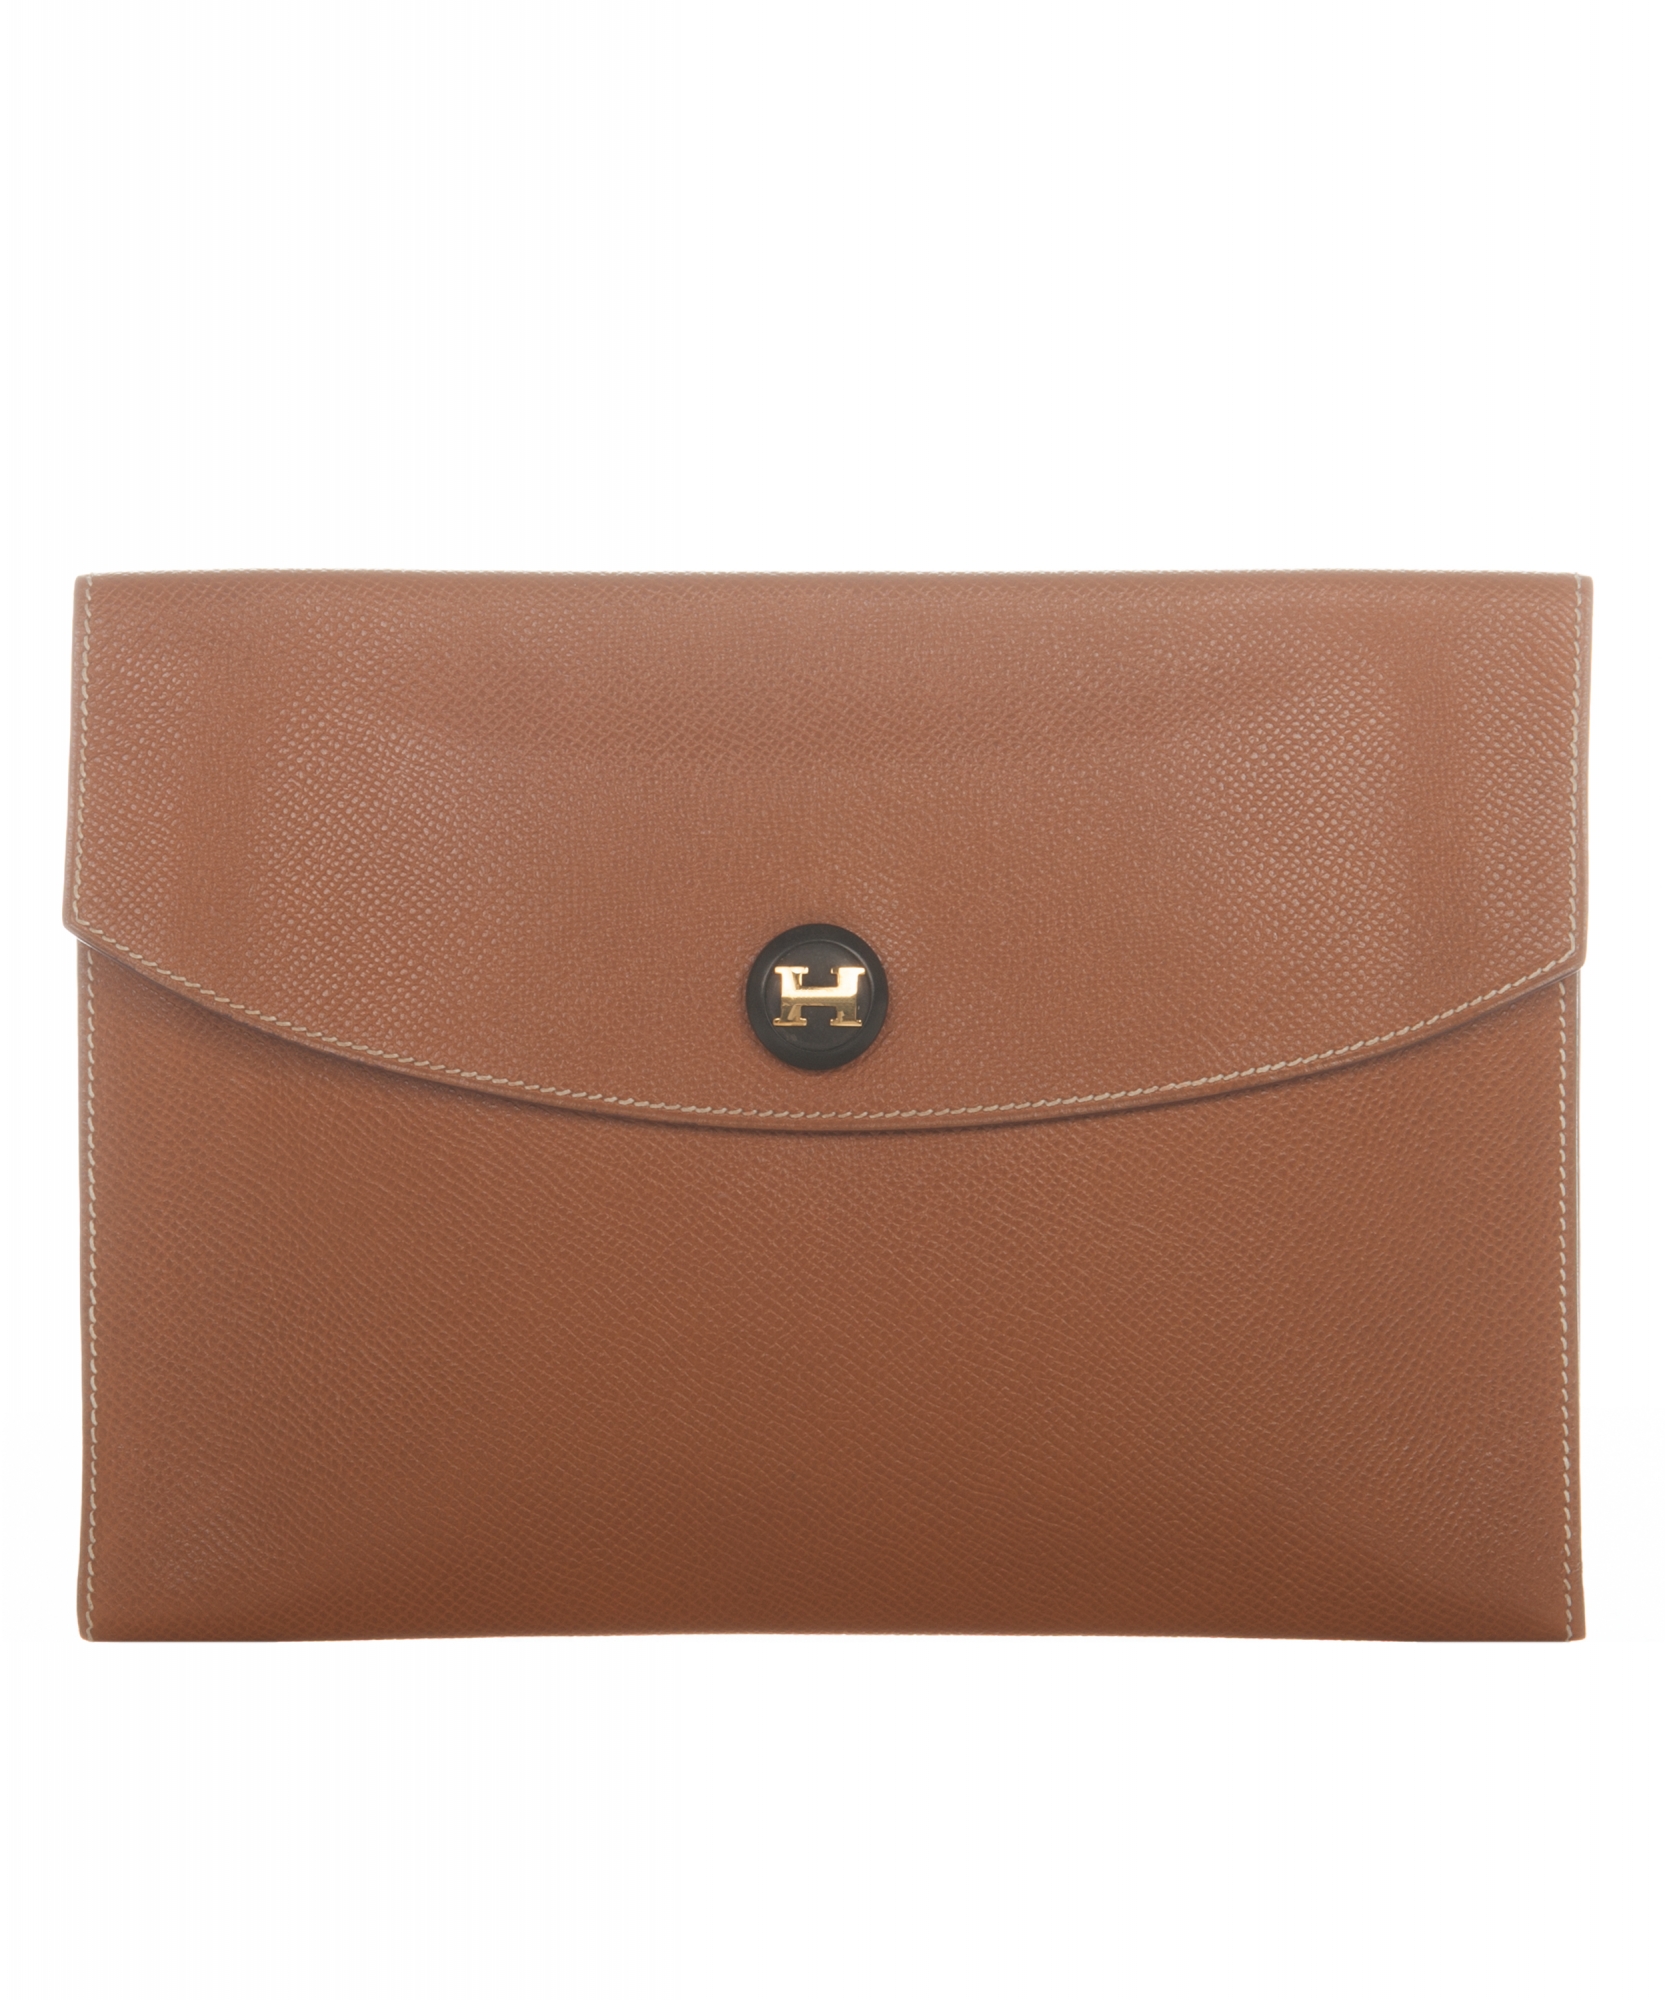 Hermes Rio Clutch Leather PM